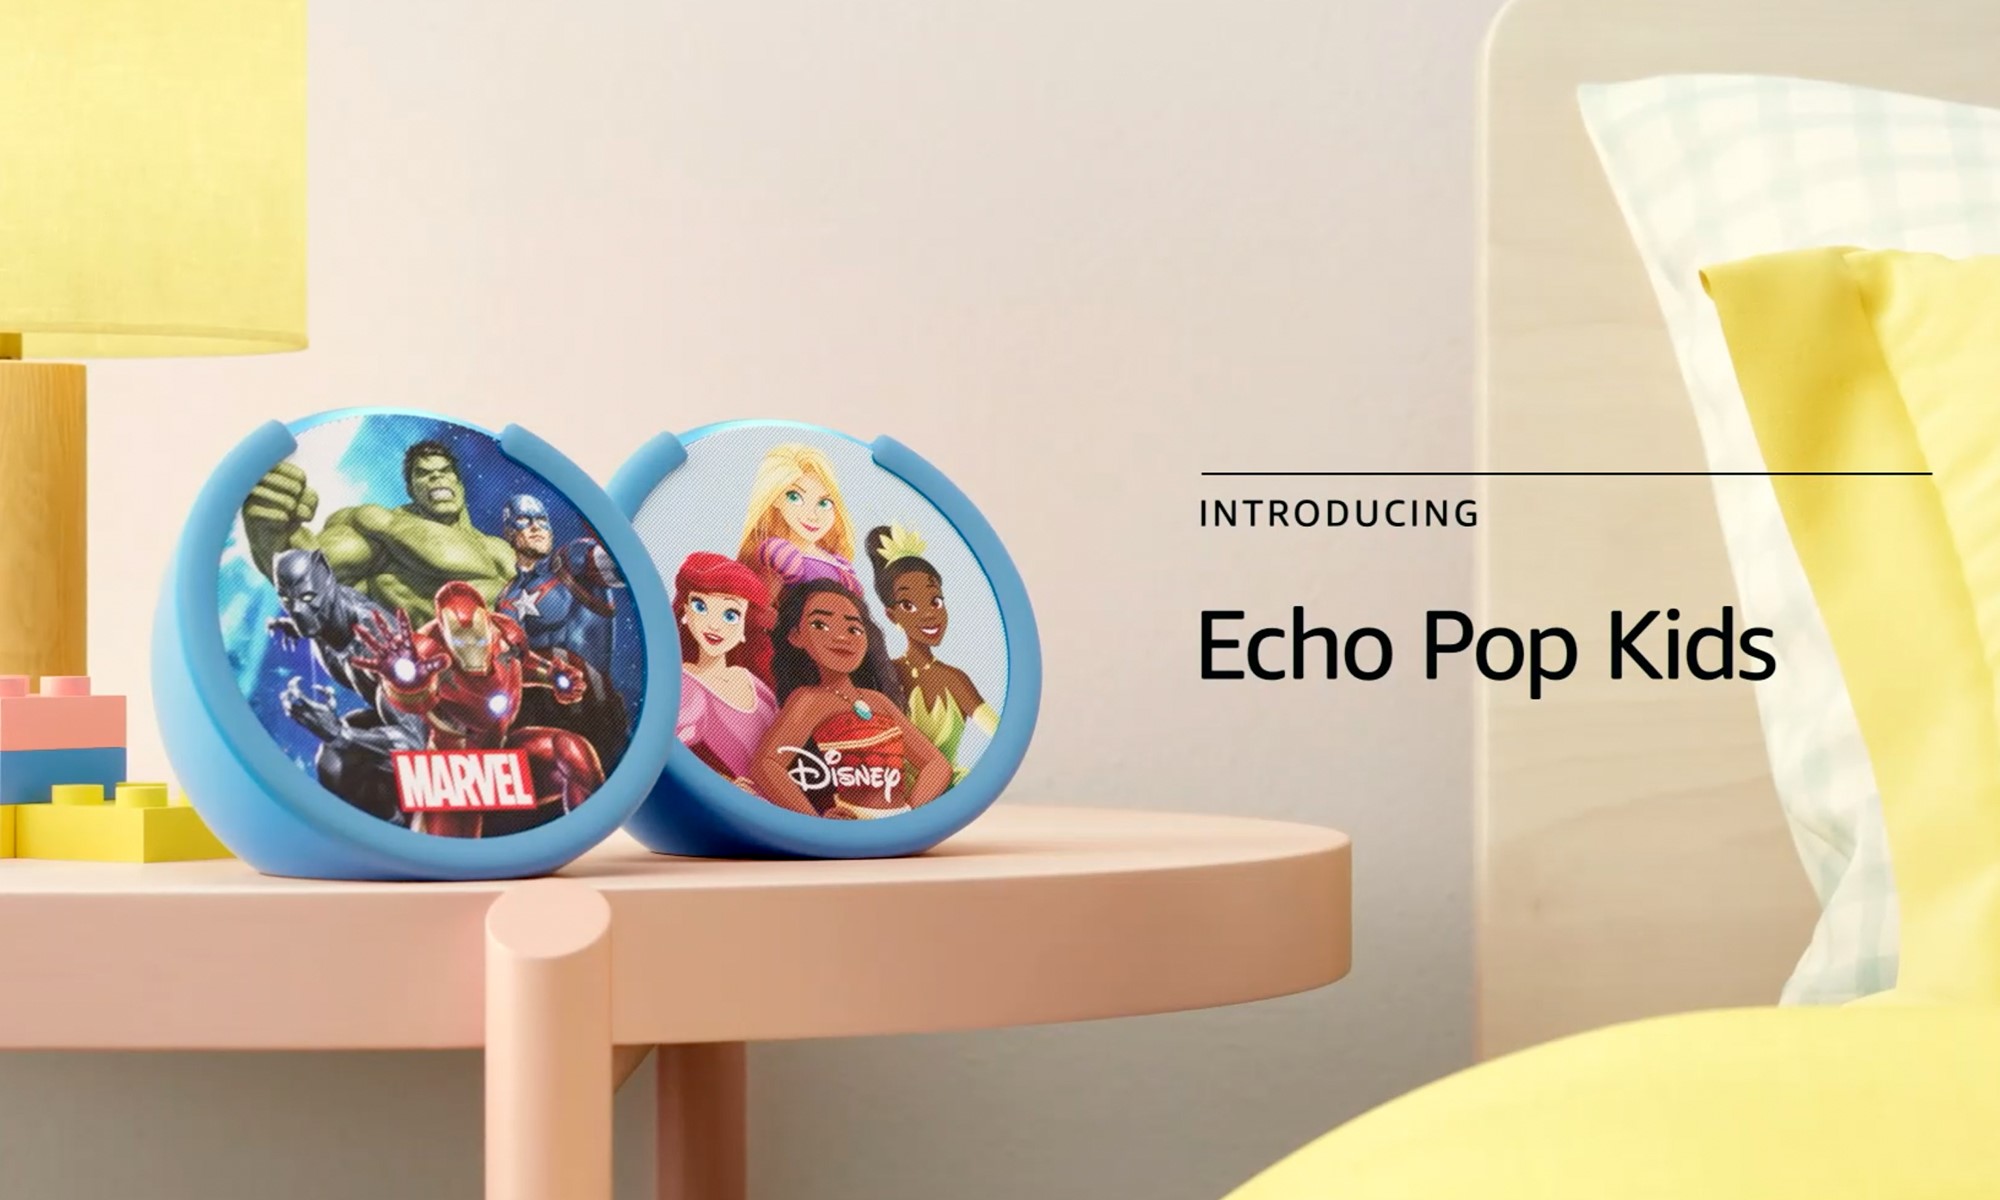 Product photo for Amazon Echo Pop Kids. A Marvel-themed speaker sits next to a Disney Princess speaker on a child's bedside table. | DeviceDaily.com